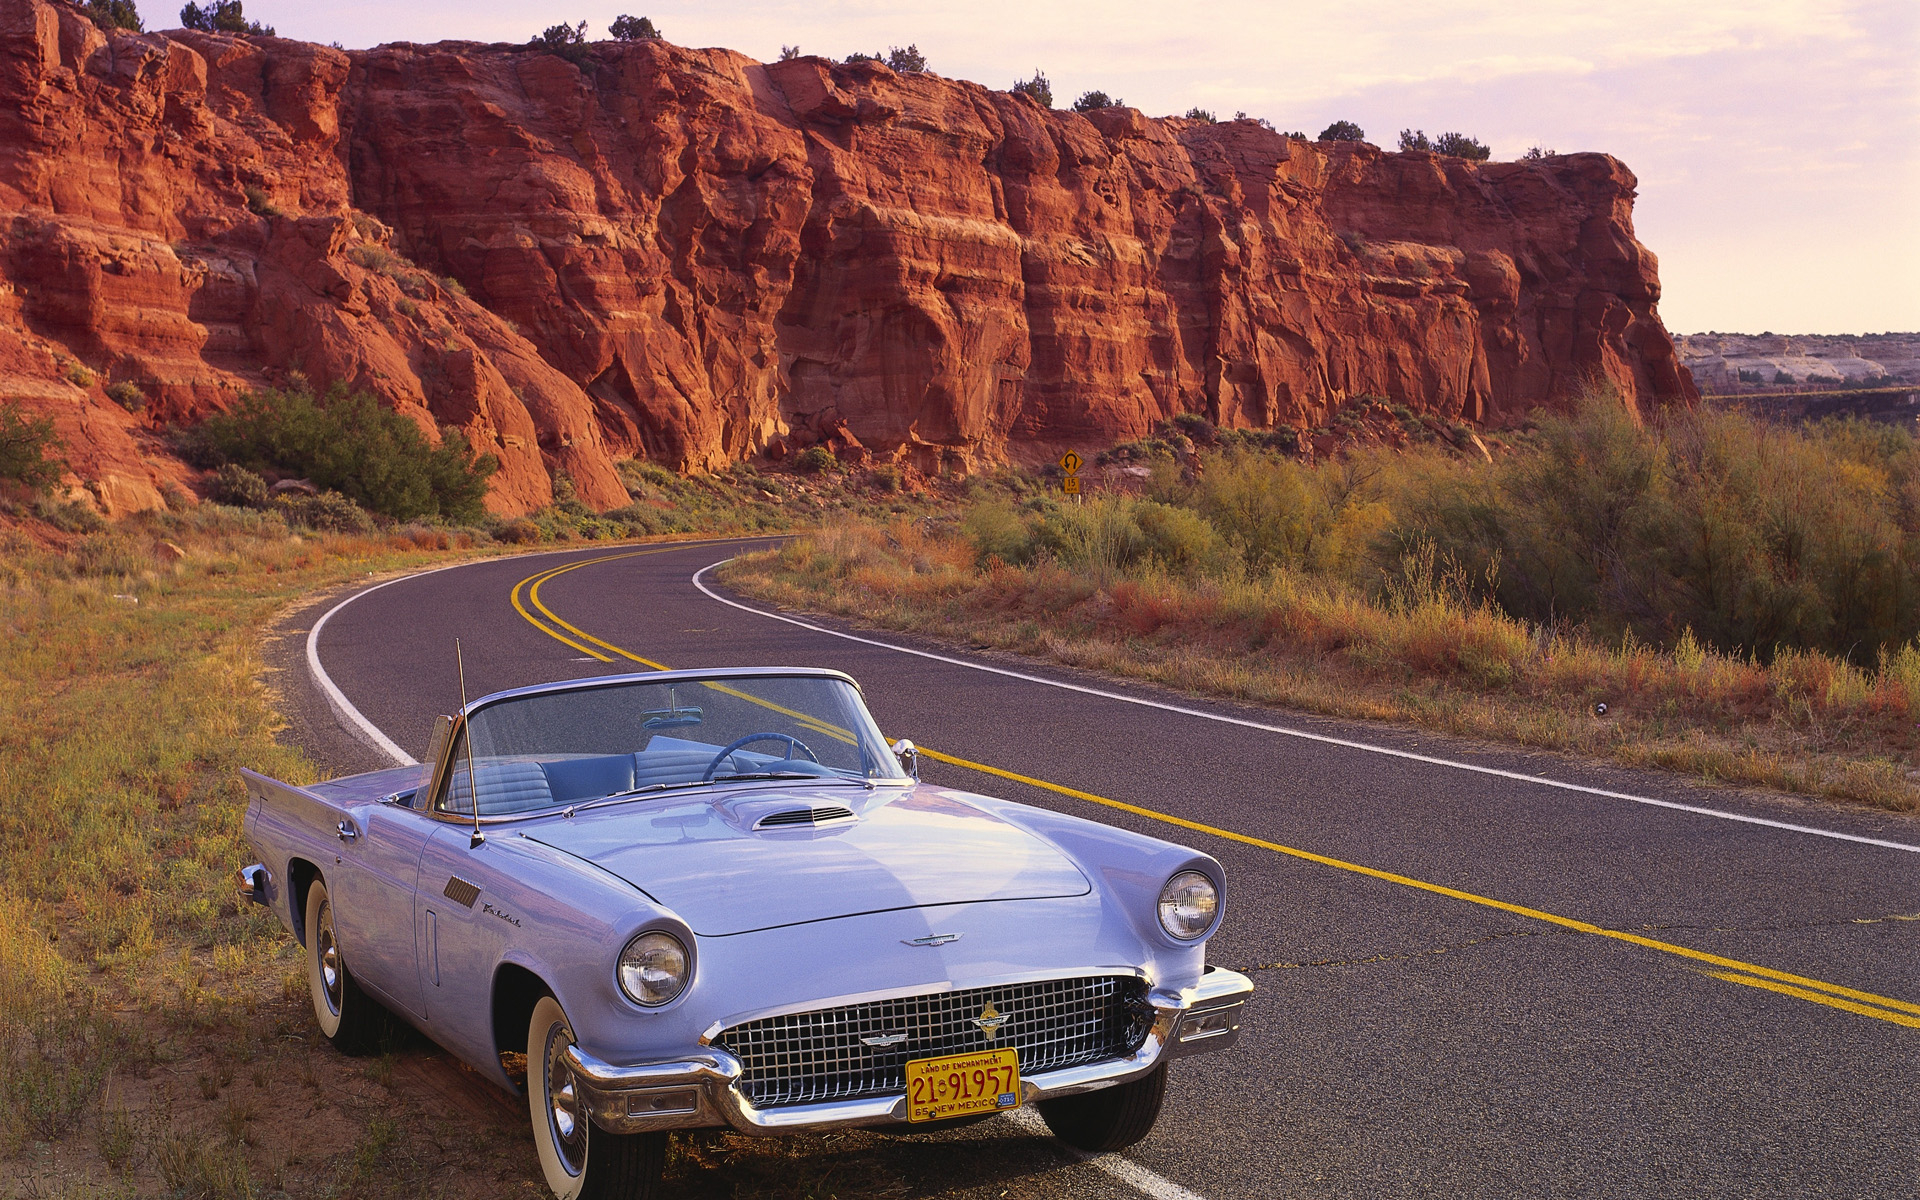 1920x1200 1957 Ford T Bird parked near colored bluffs on Route 66 in Laguna New Mexico Sample Pictures Wallpaper (41407754) Fanpop